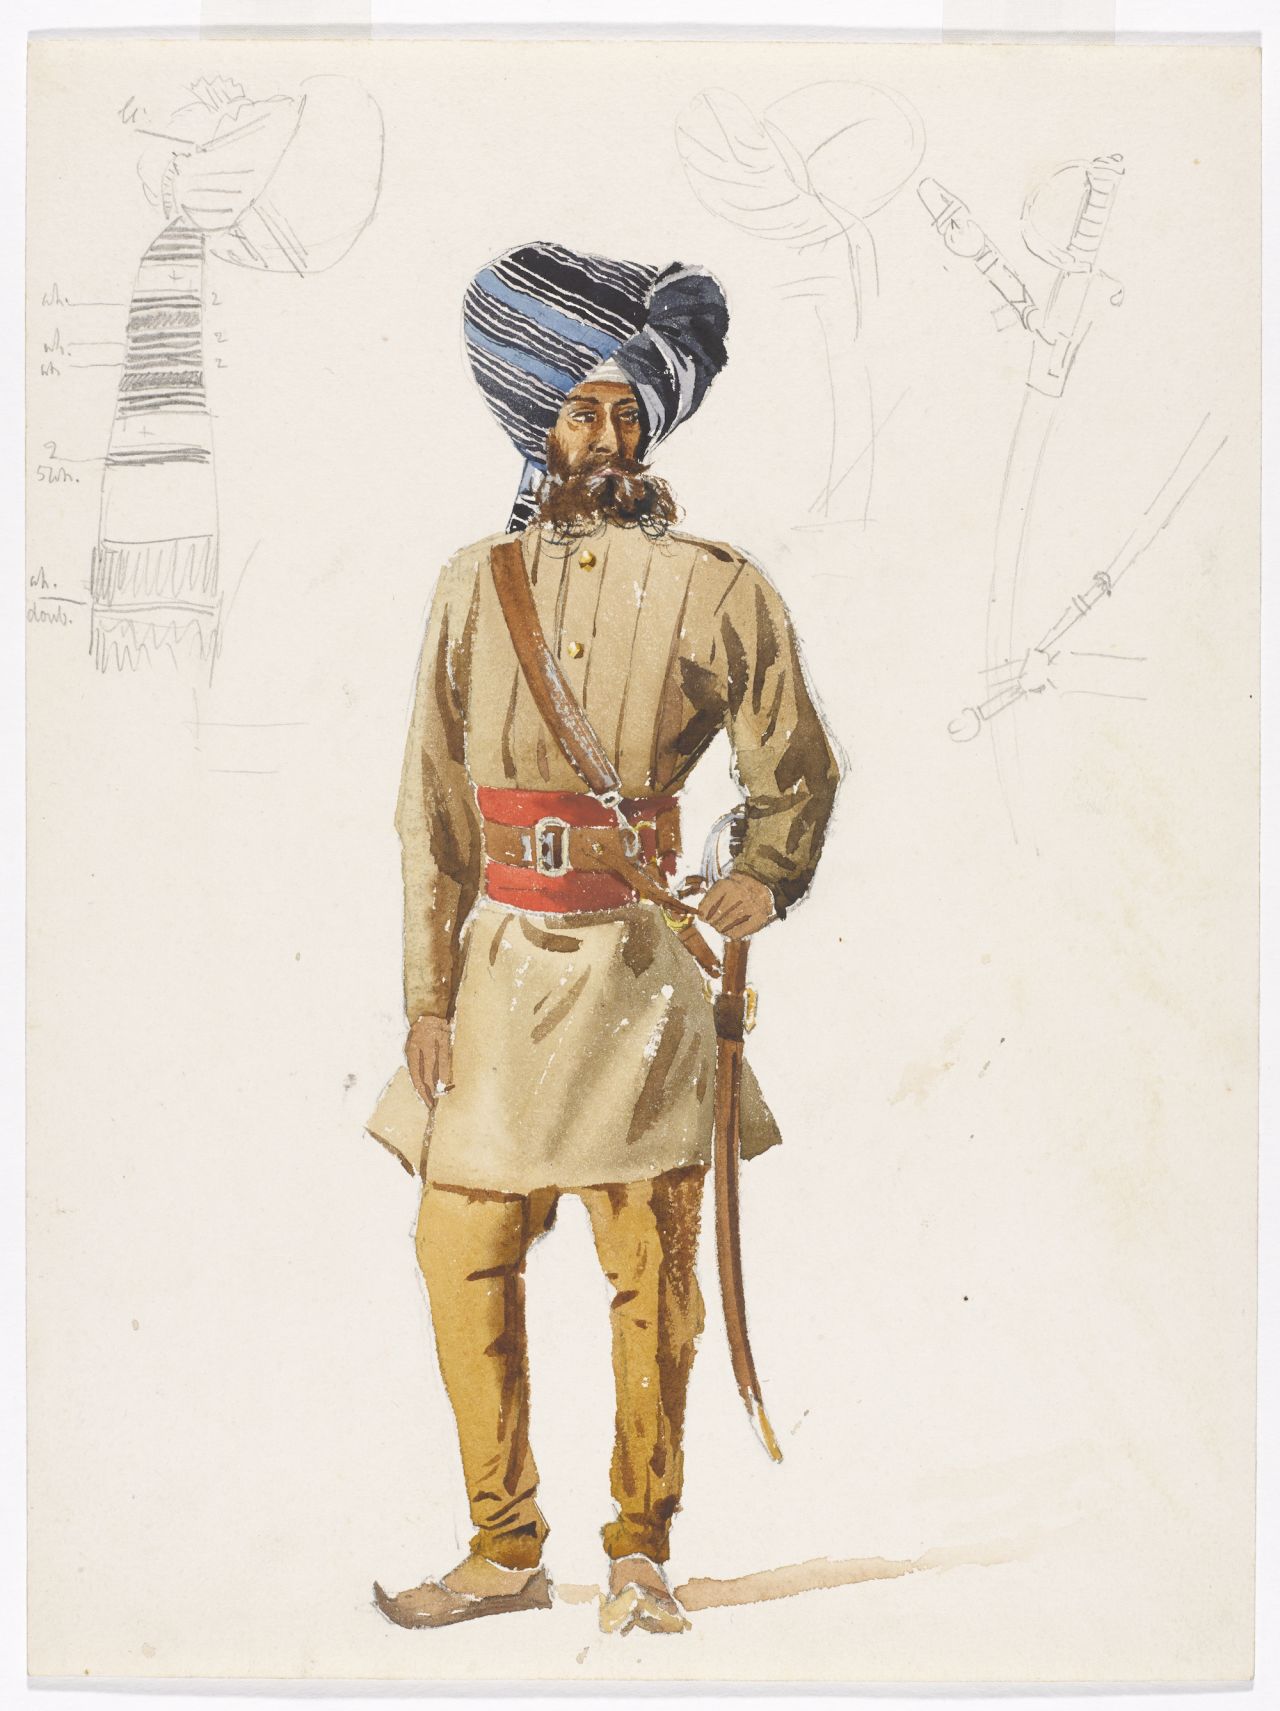 Some styles of turban, such as those worn by cavalry regiments or used for special occassions like weddings, feature a tail of loose cloth at the back.